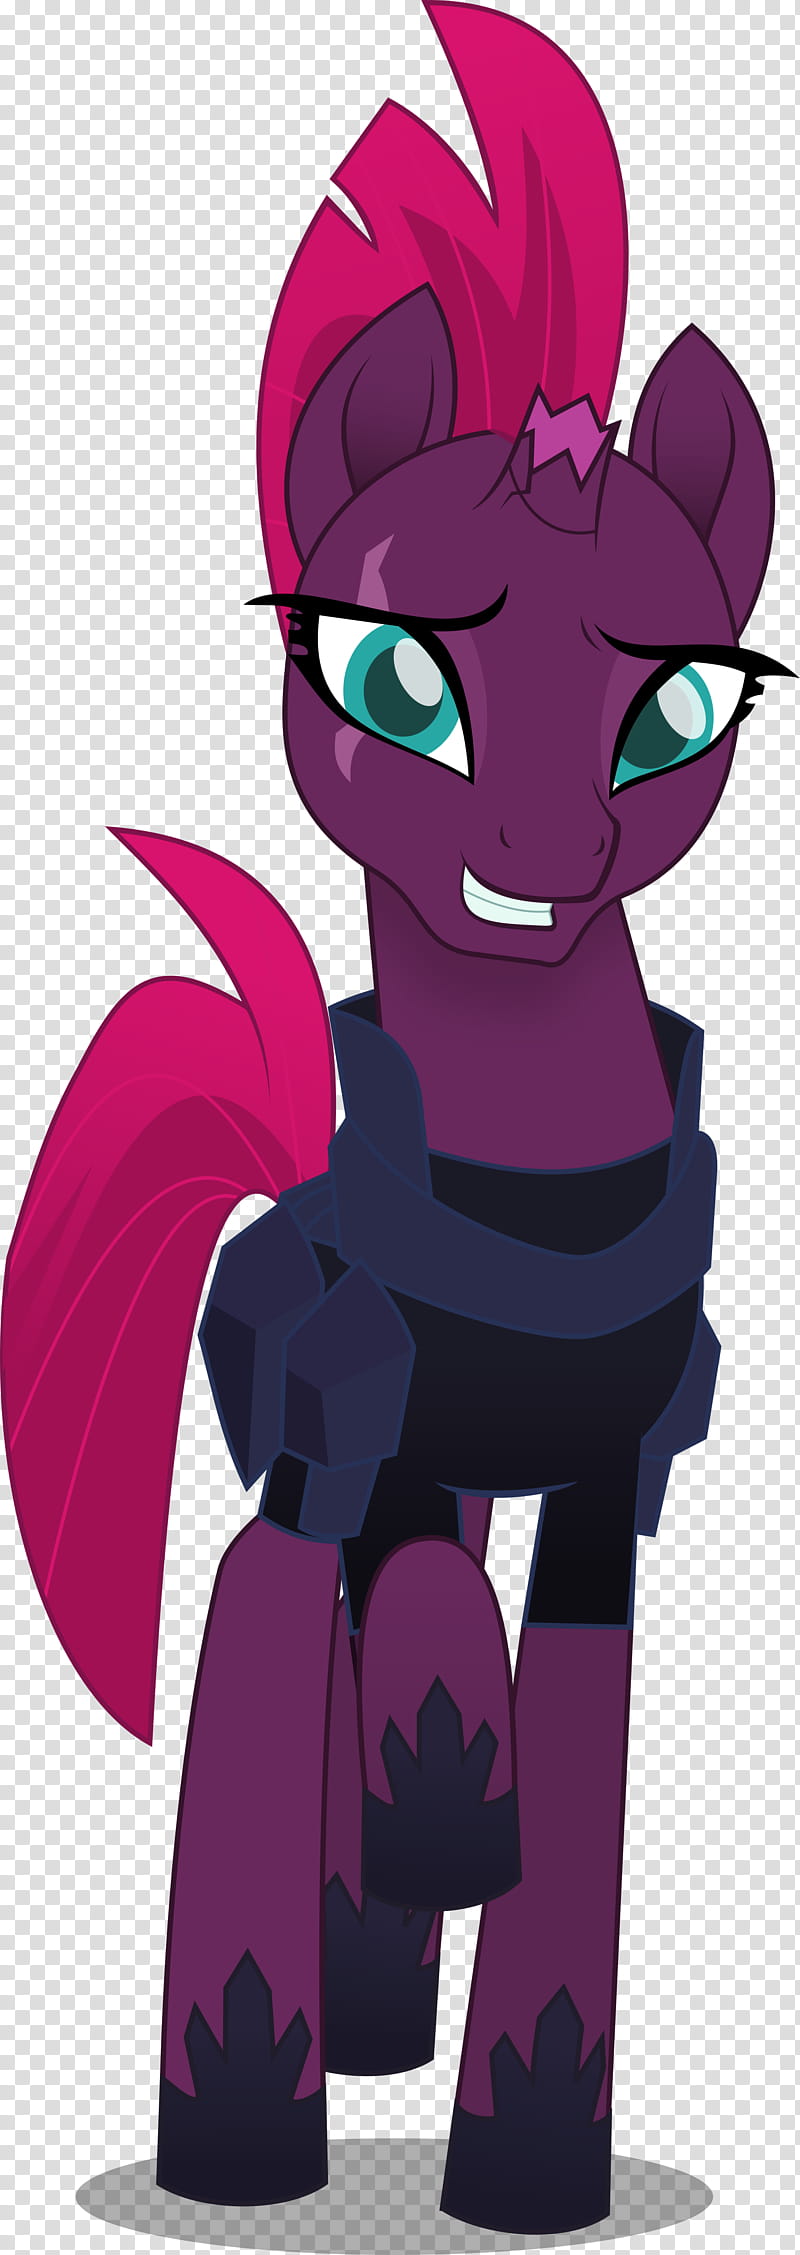 MLP Movie Tempest Shadow, purple My Little Pony unicorn toy transparent background PNG clipart